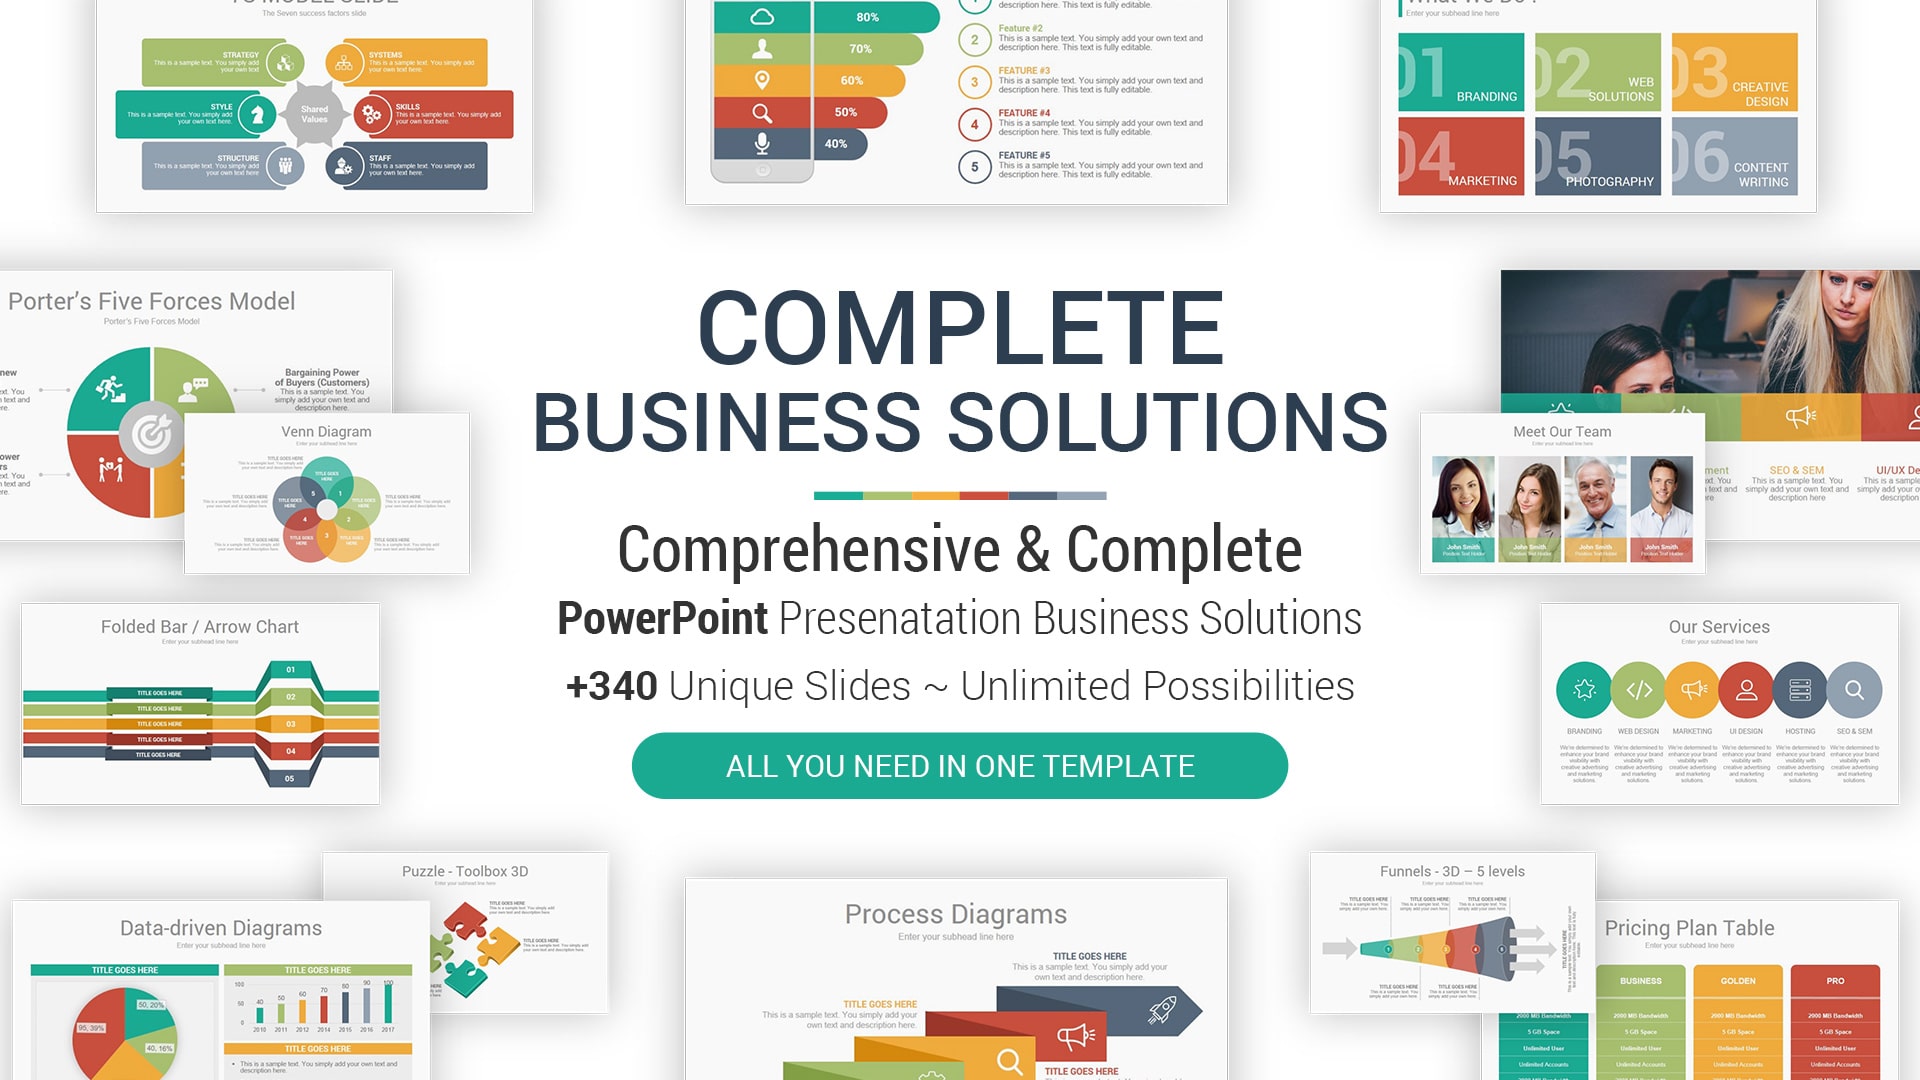 Complete Business Solutions Multipurpose PowerPoint Presentation Template - Cool PowerPoint Templates